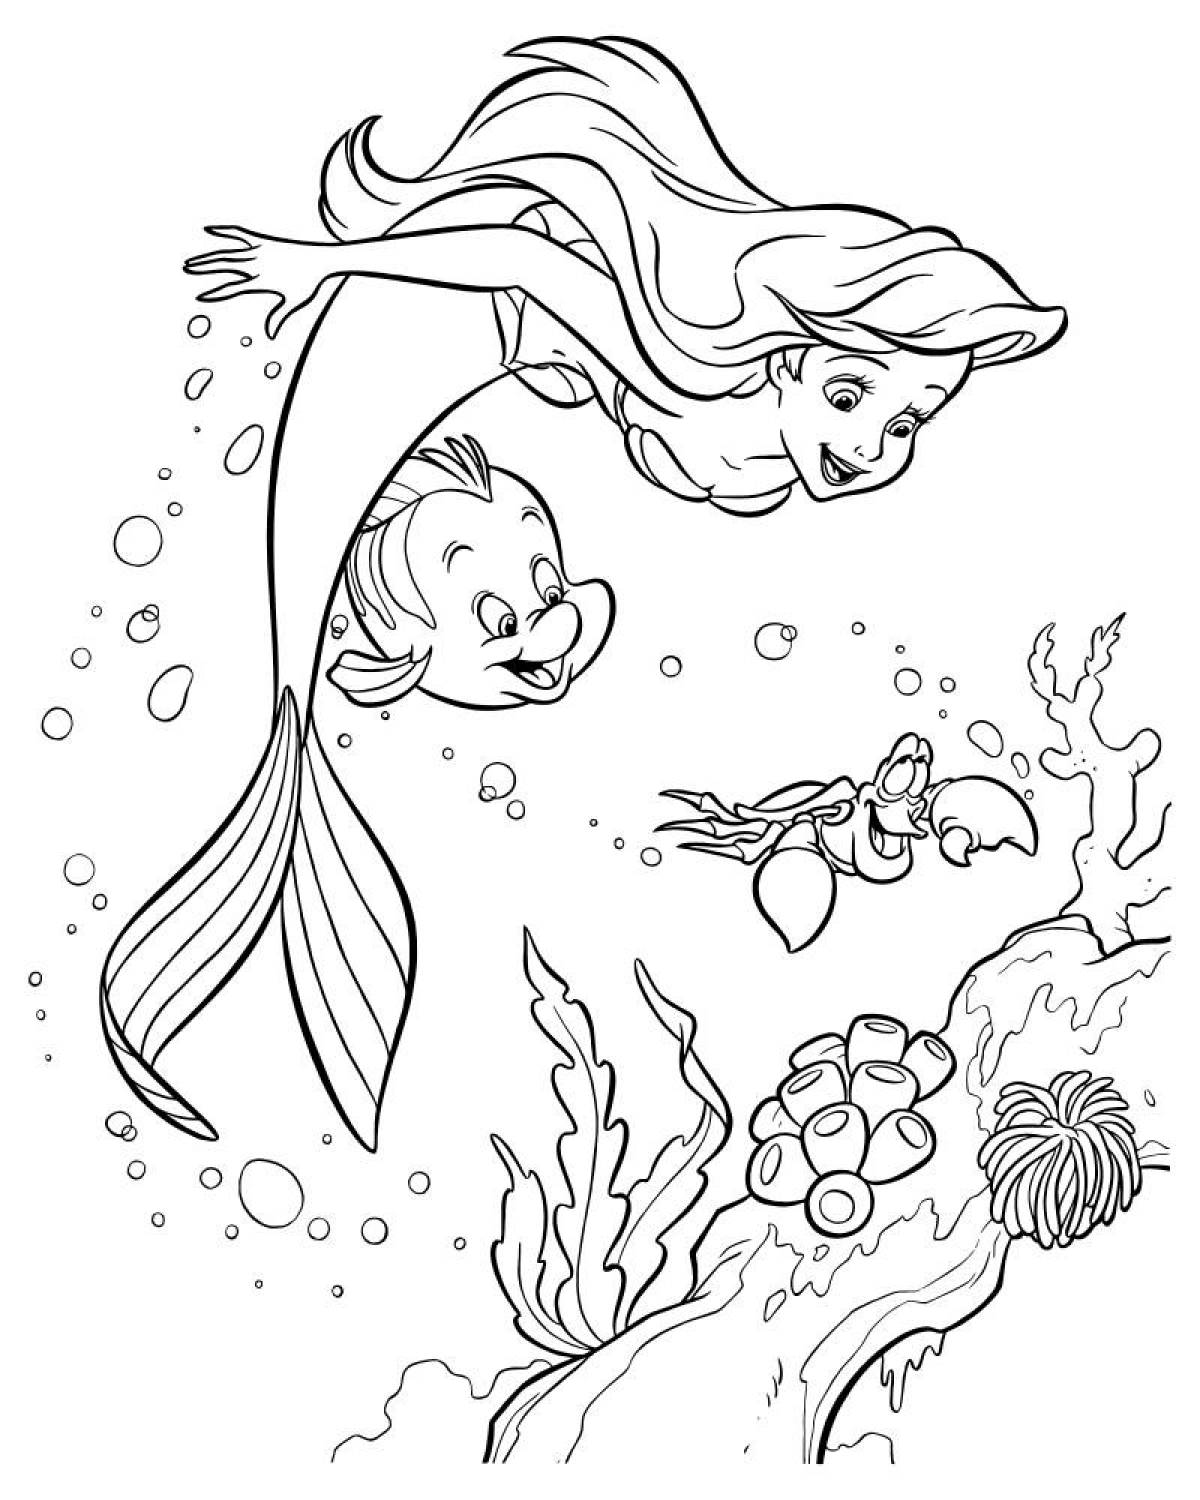 Exquisite mermaid coloring book for kids